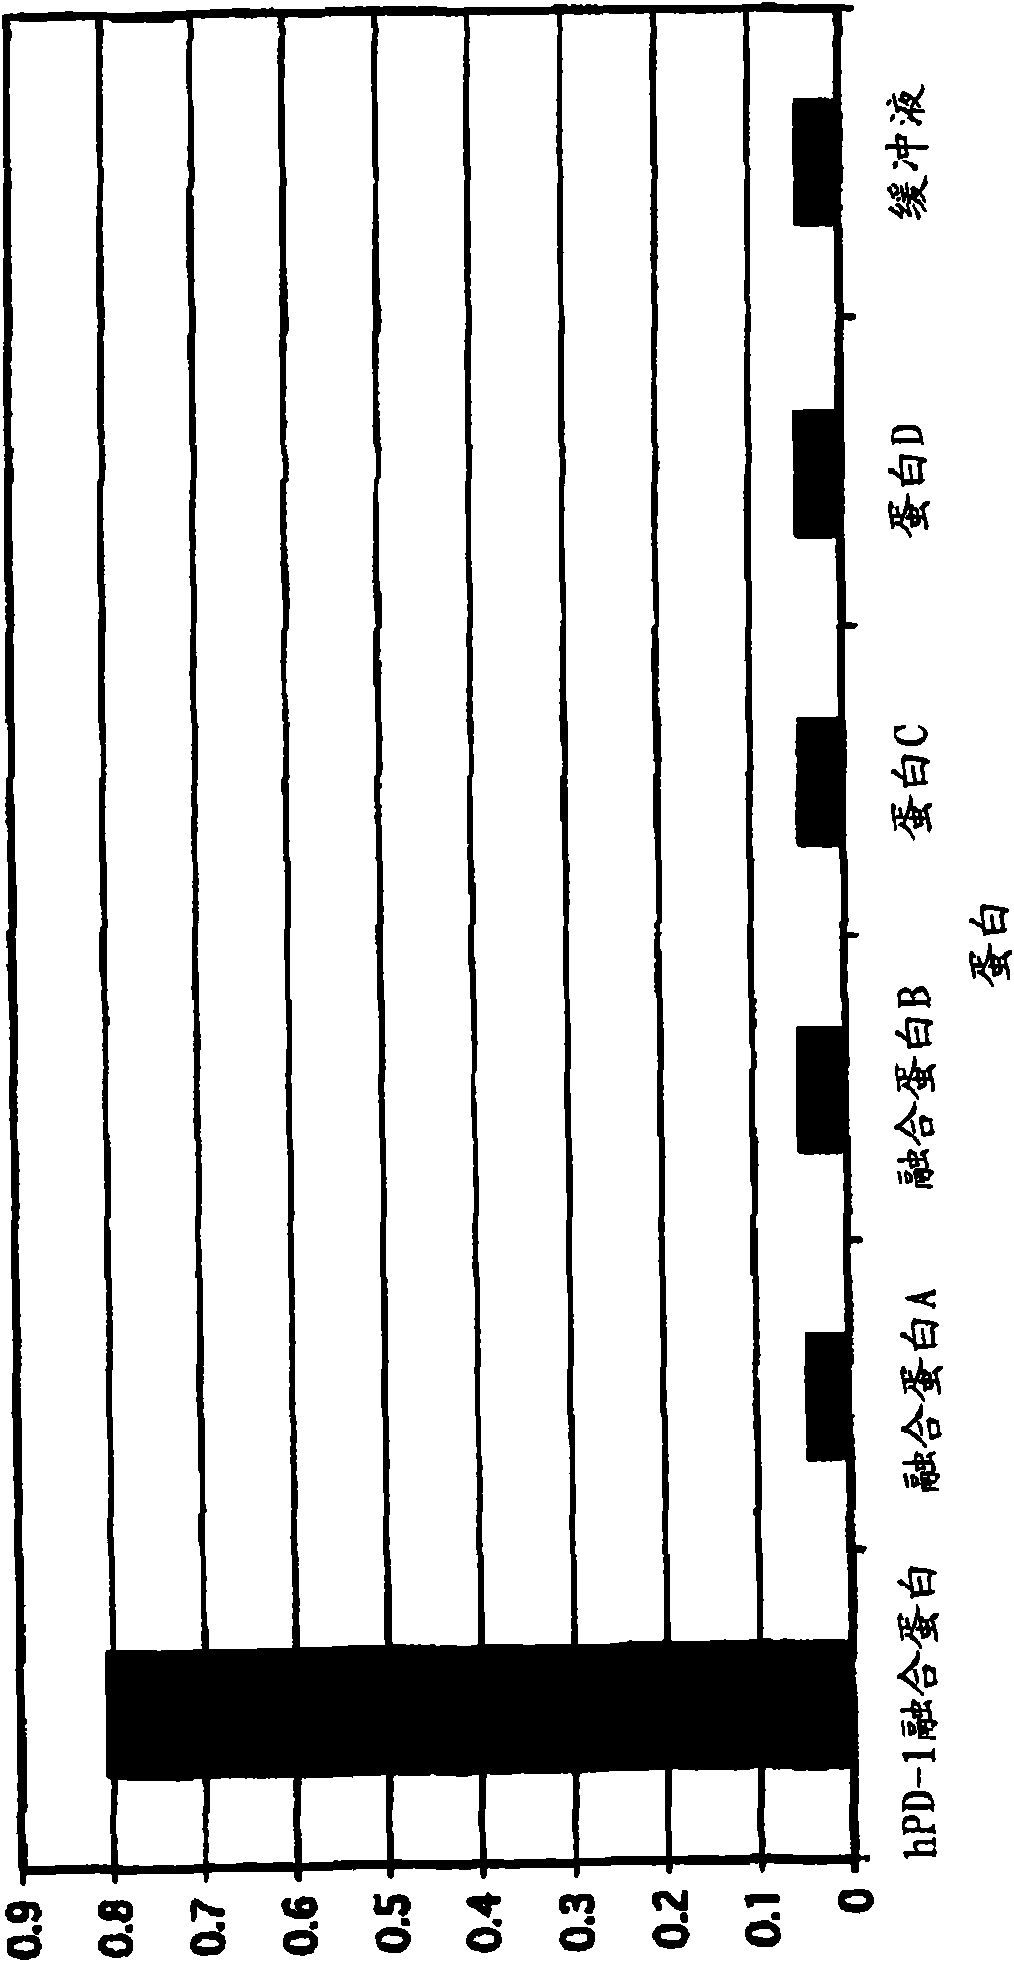 Antibodies against PD-1 and uses therefor